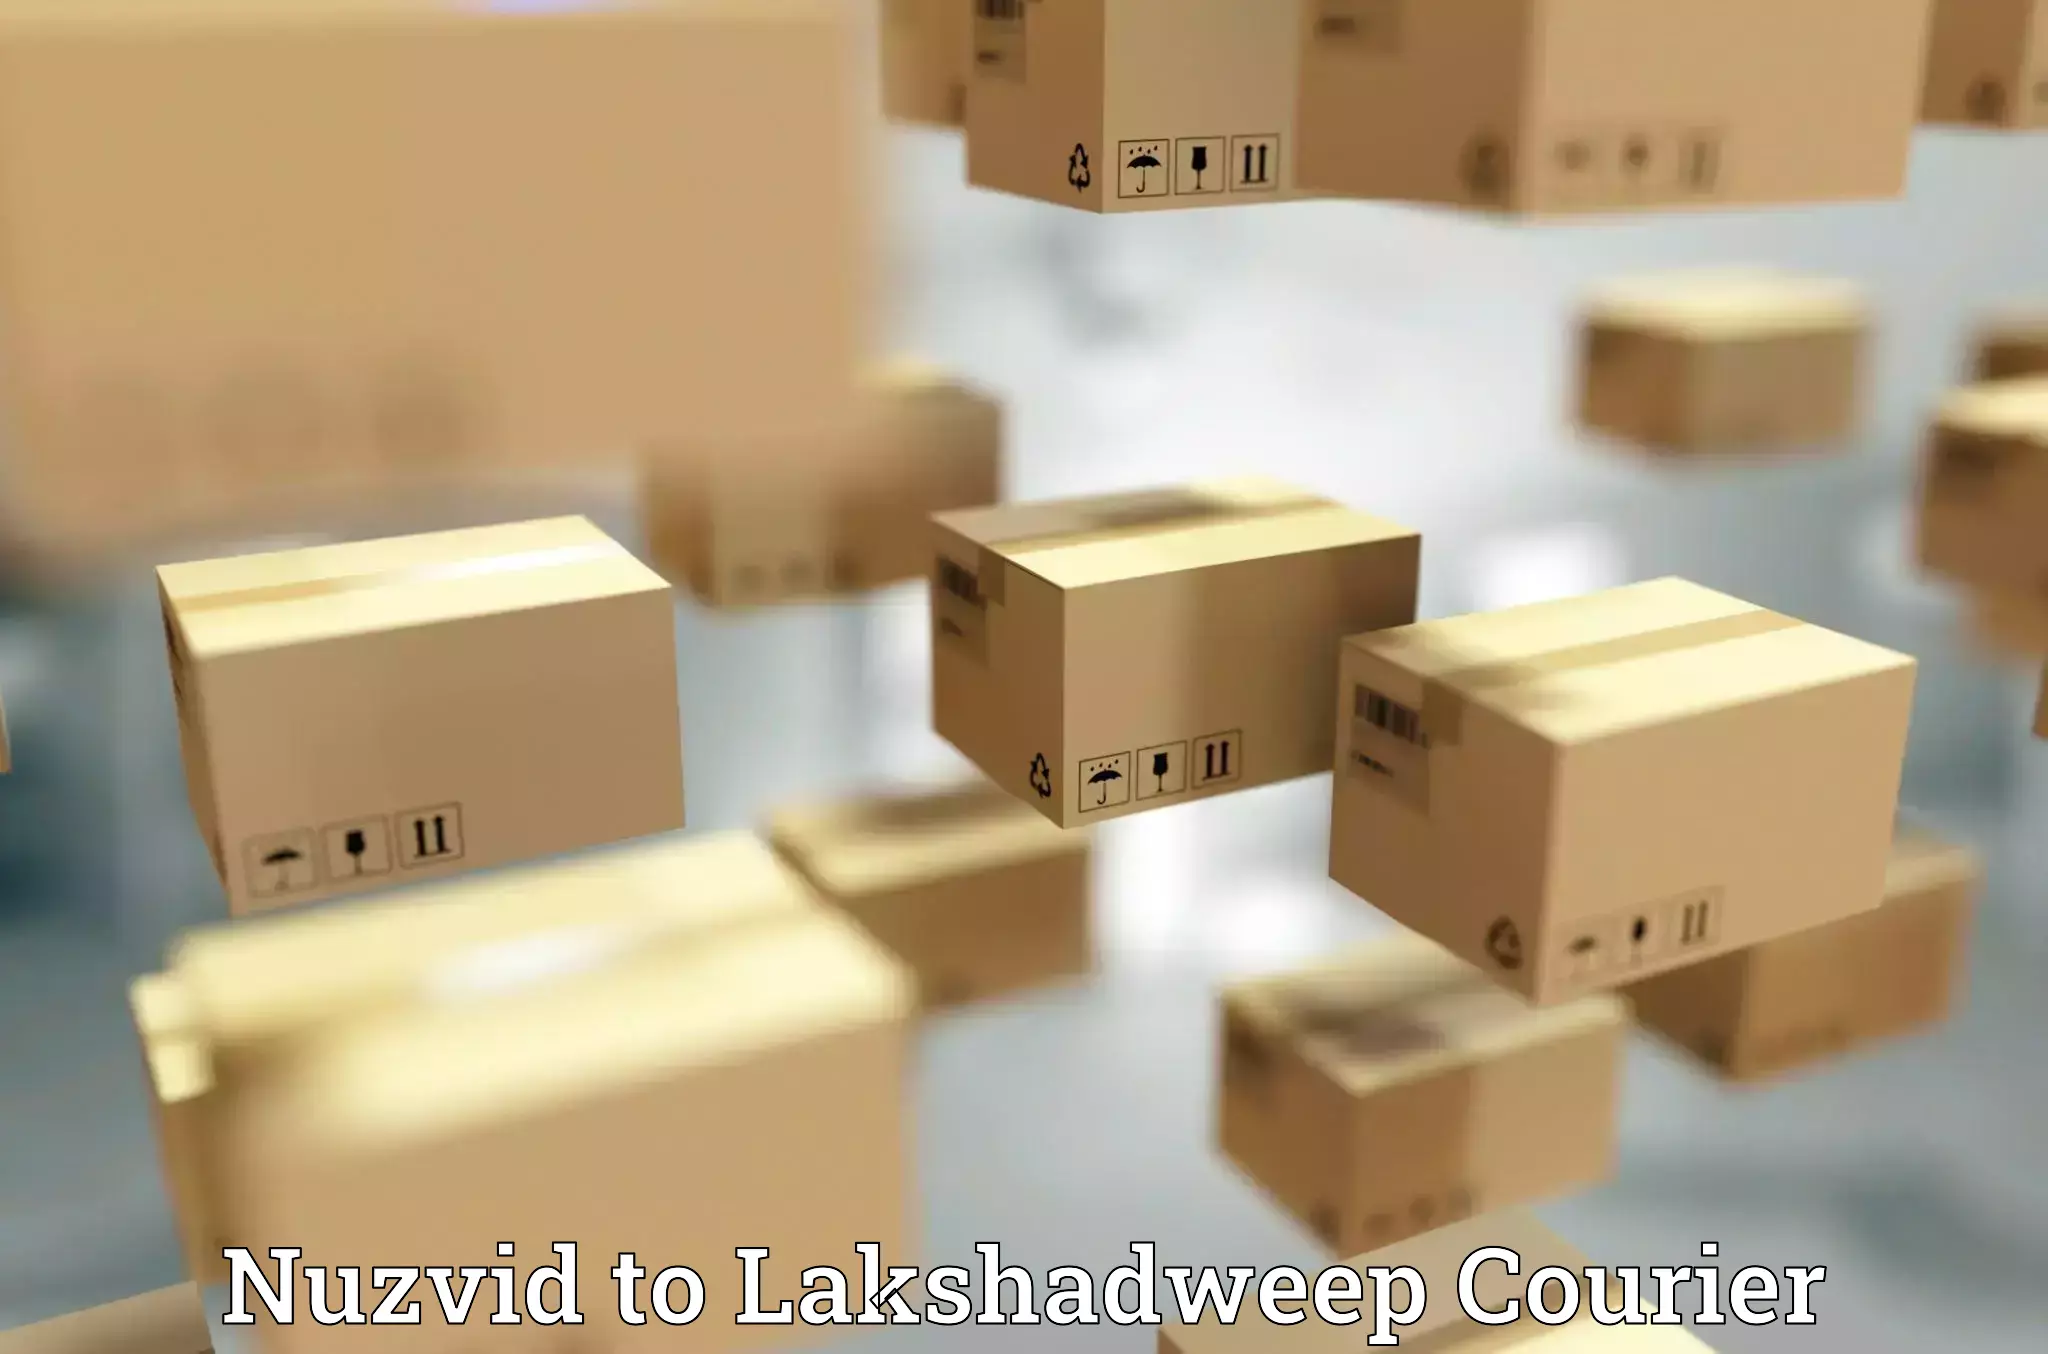 24-hour courier service in Nuzvid to Lakshadweep